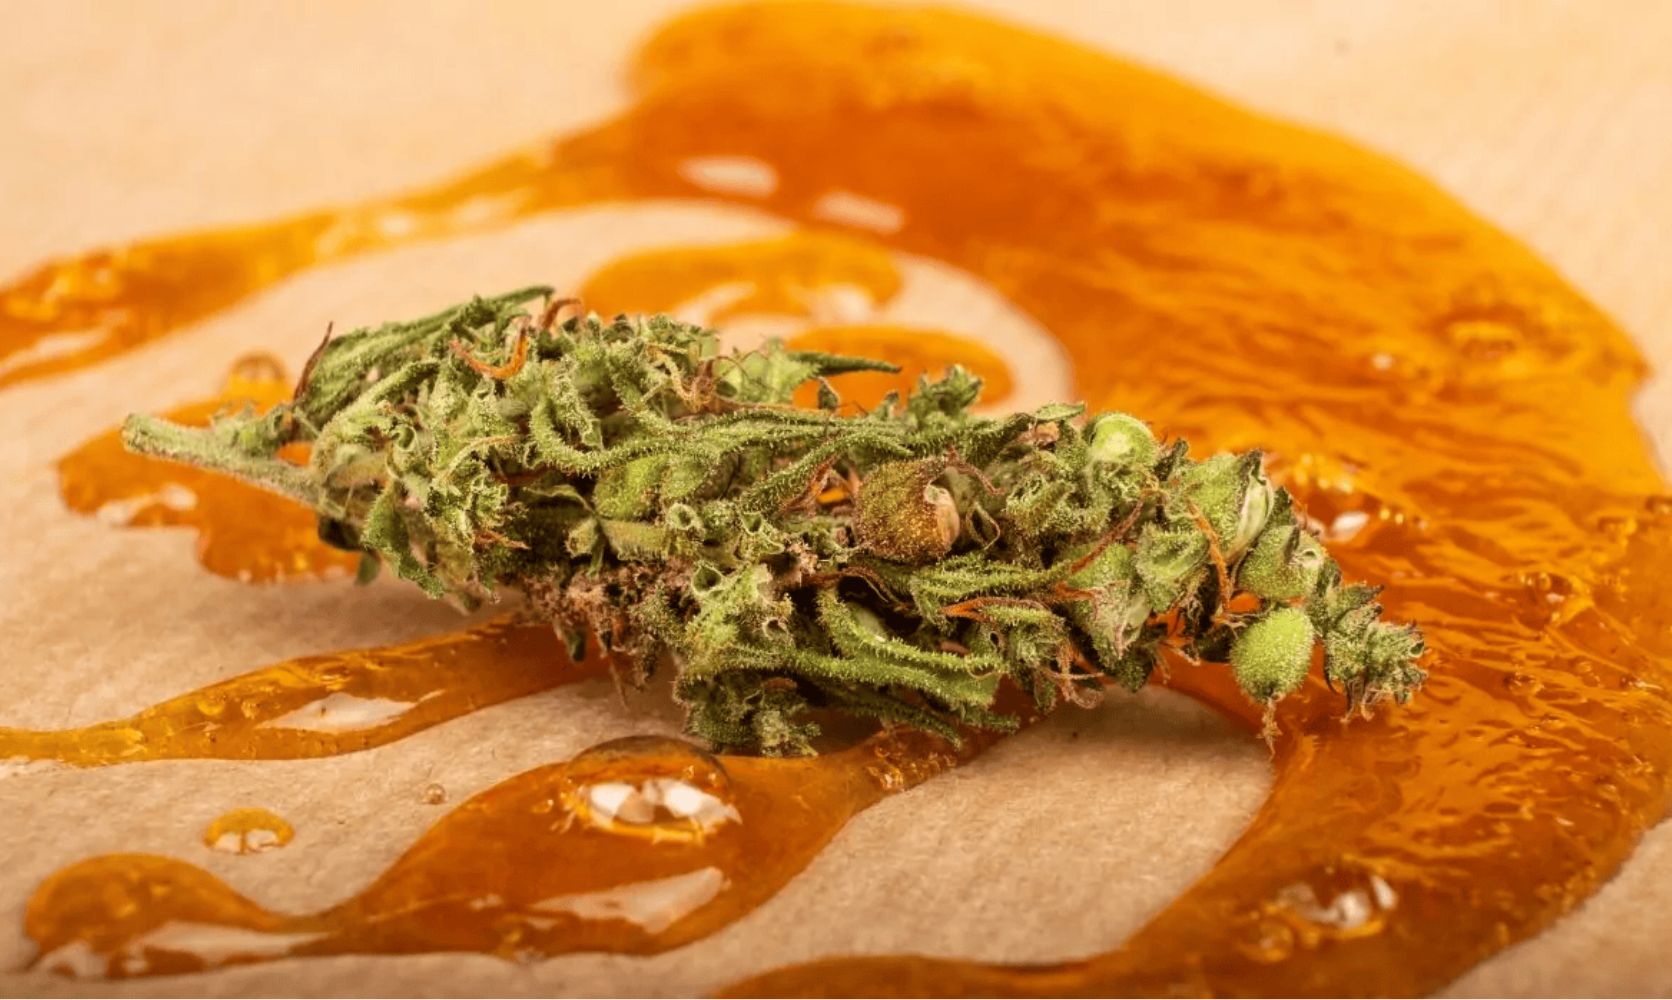 Indulge in the purest cannabis concentrate & buy rosin in Canada! This guide reveals the THC content, consumption methods, & storage techniques.